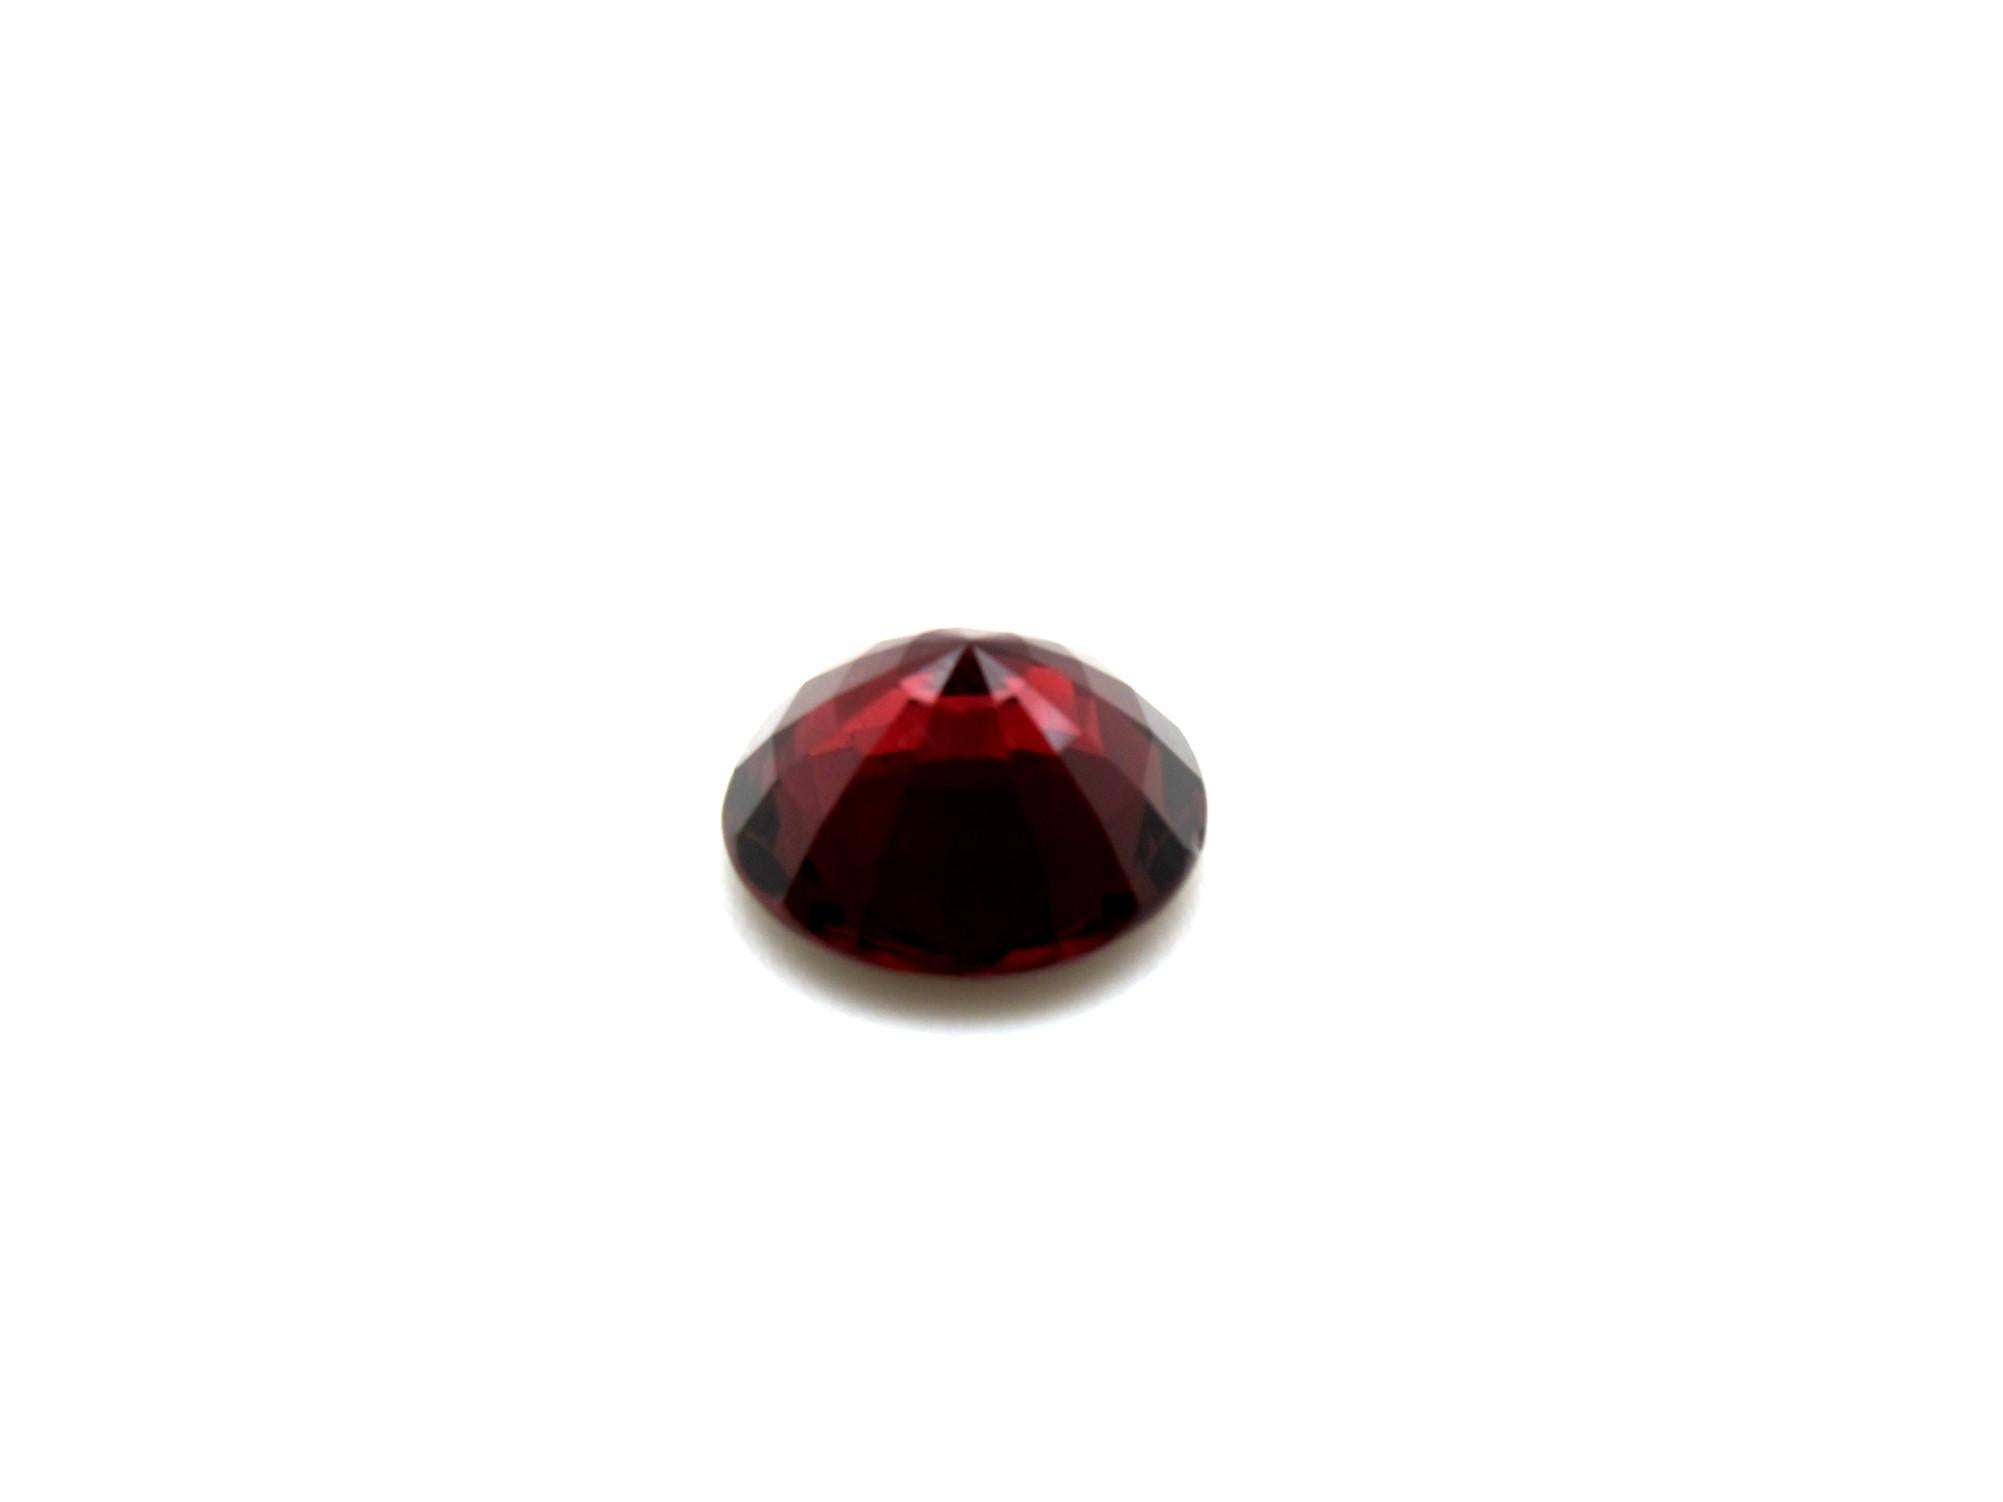 Unheated 7.84 Carat Red Spinel Round, Loose Gemstone, GIA Certified 3